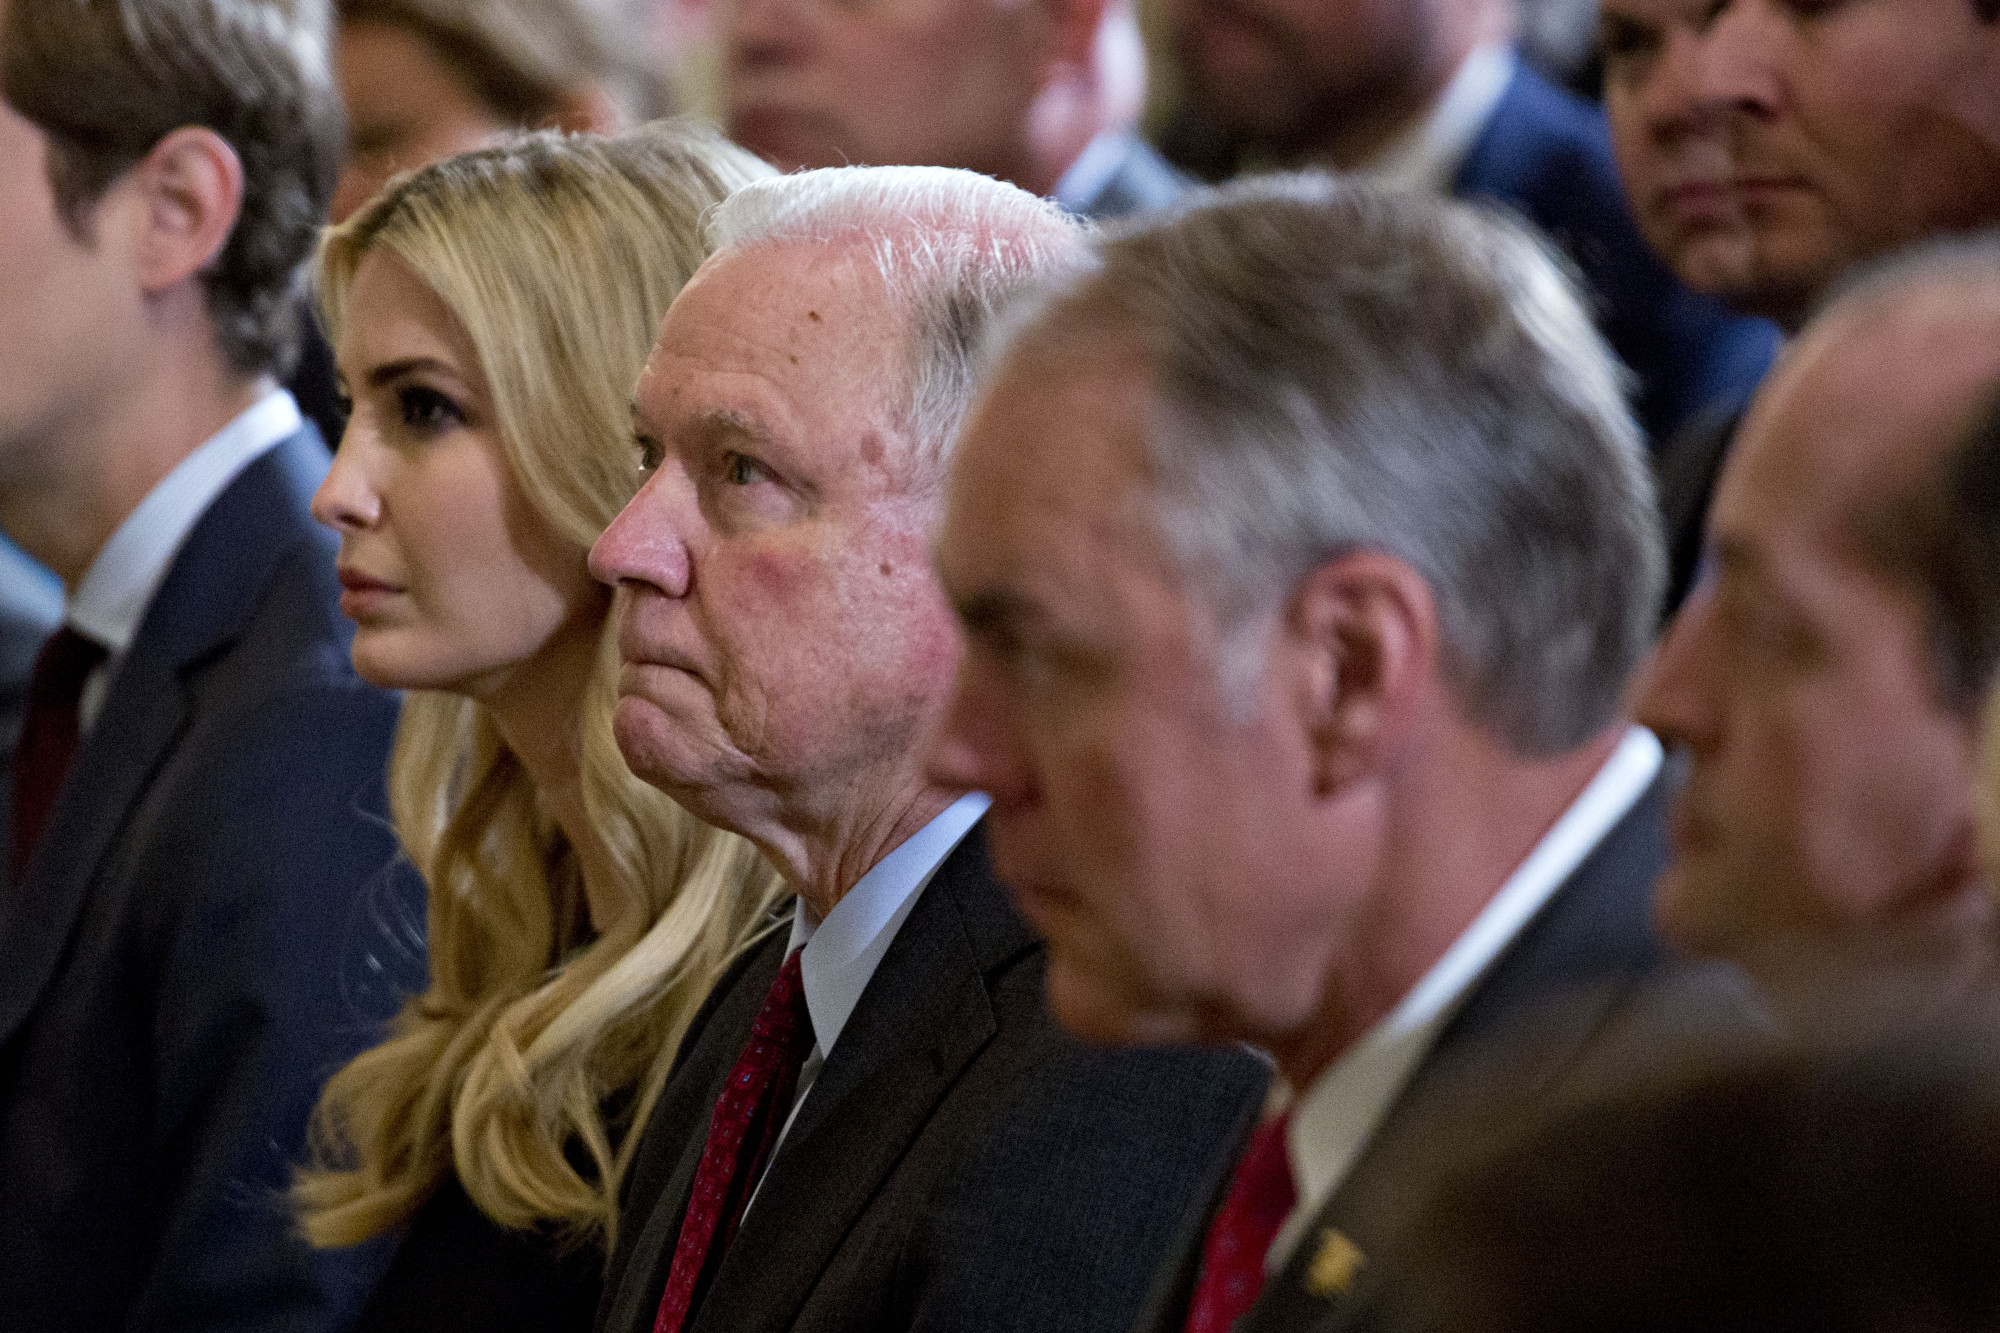 Jeff Sessions, U.S. attorney general (center) attends an event&nbsp;in the East Room of the White House in Washington on May 18, 2018.&nbsp;